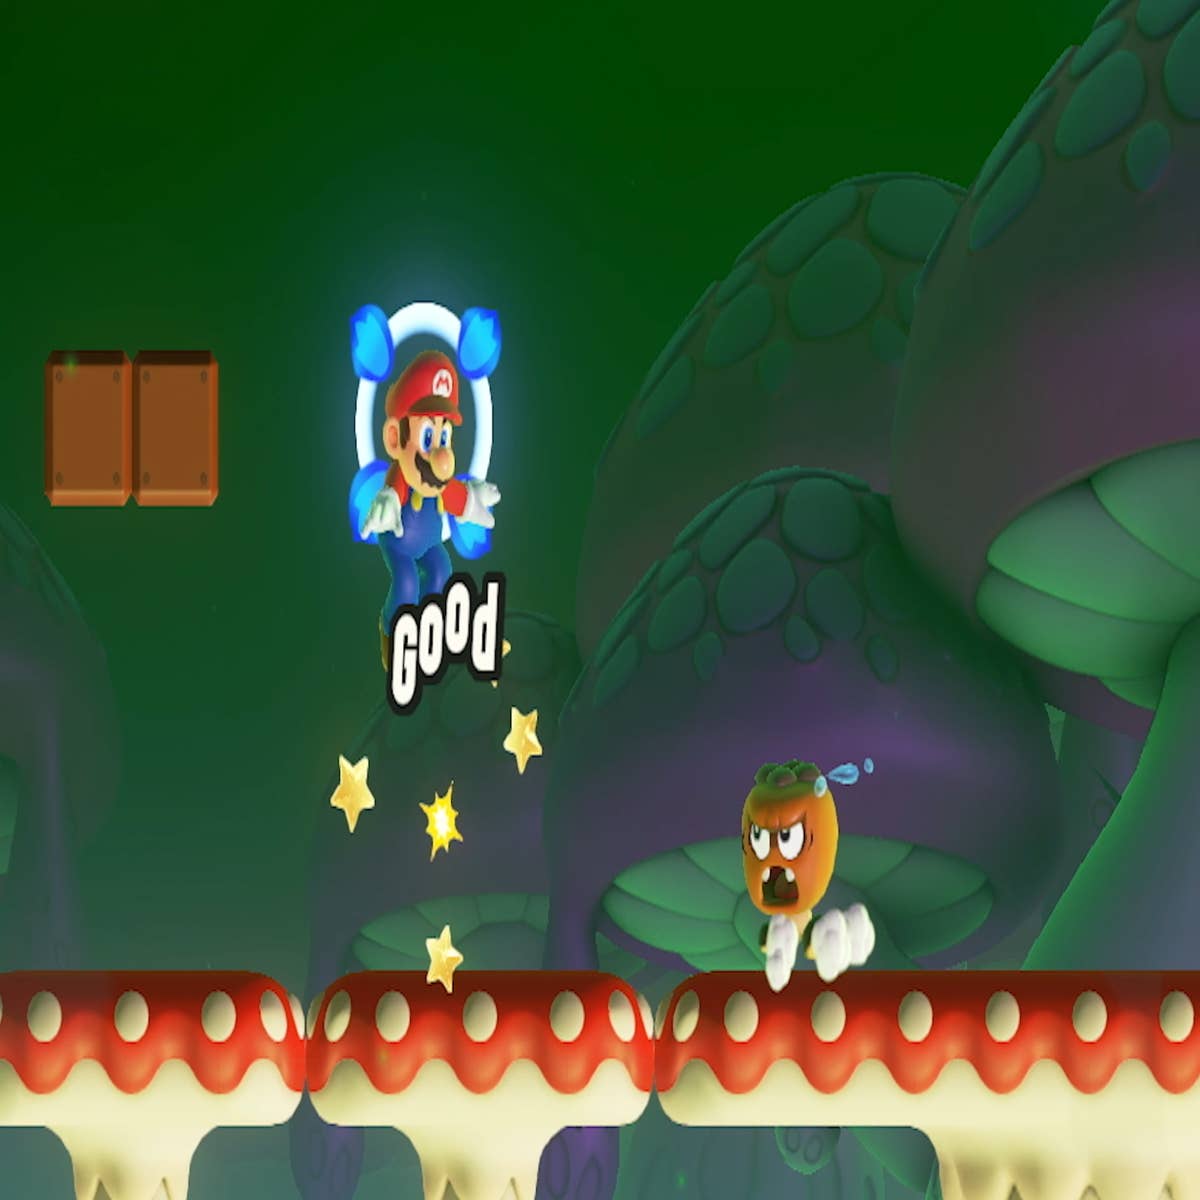 Super Mario Bros. Wonder' is about being nice to people on the internet